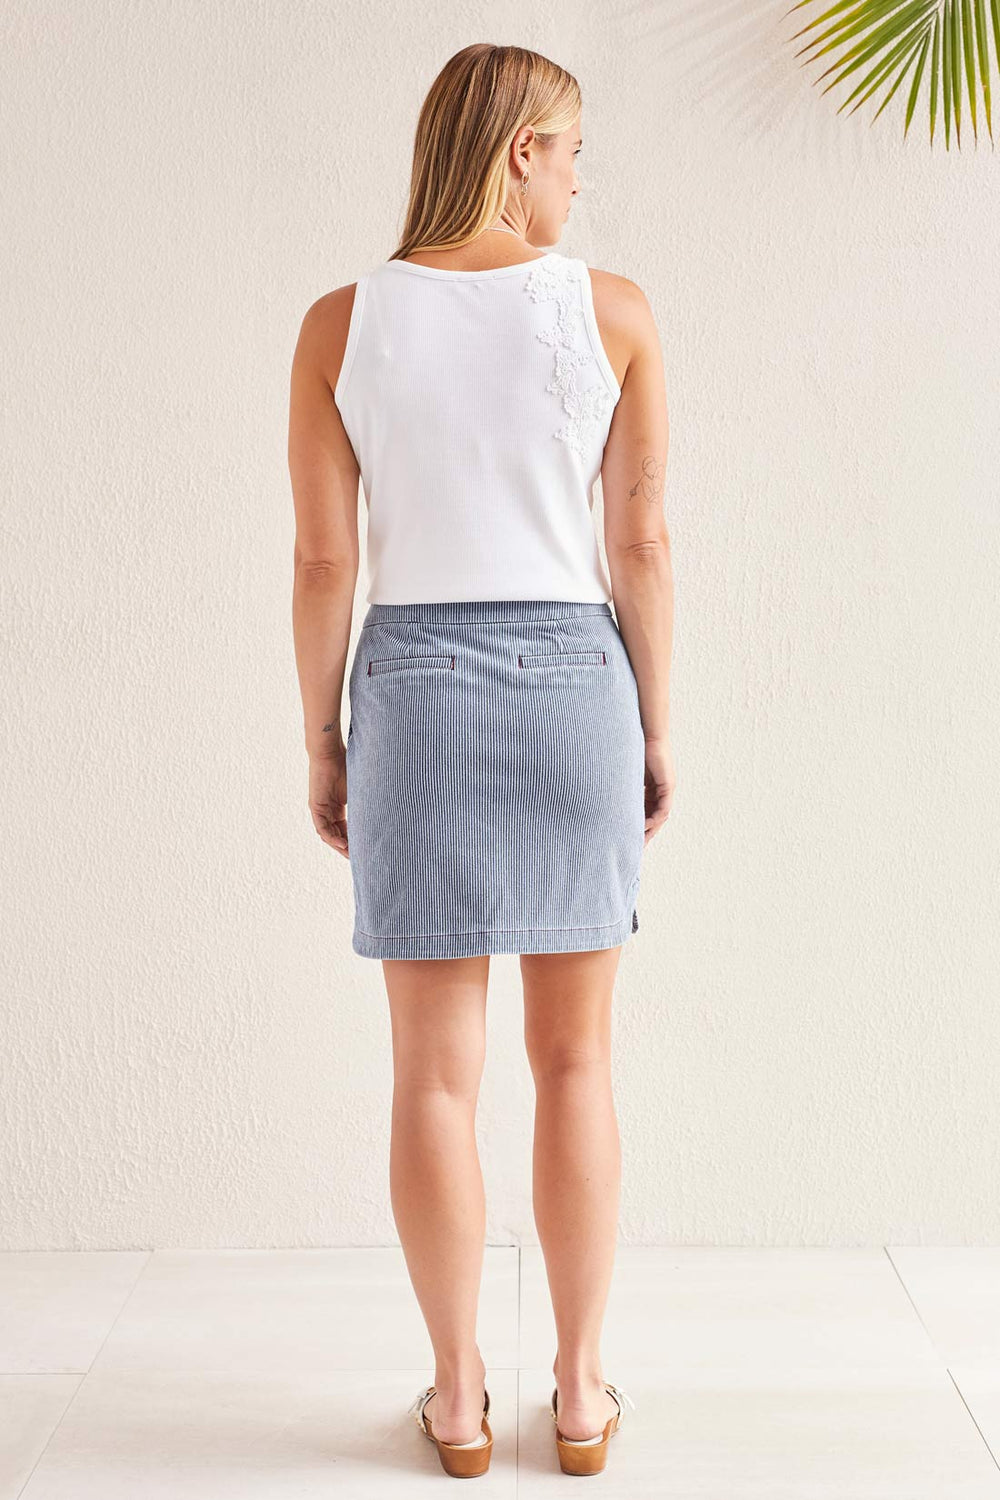 Tribal Pull-On Skort with Contrast Stitching